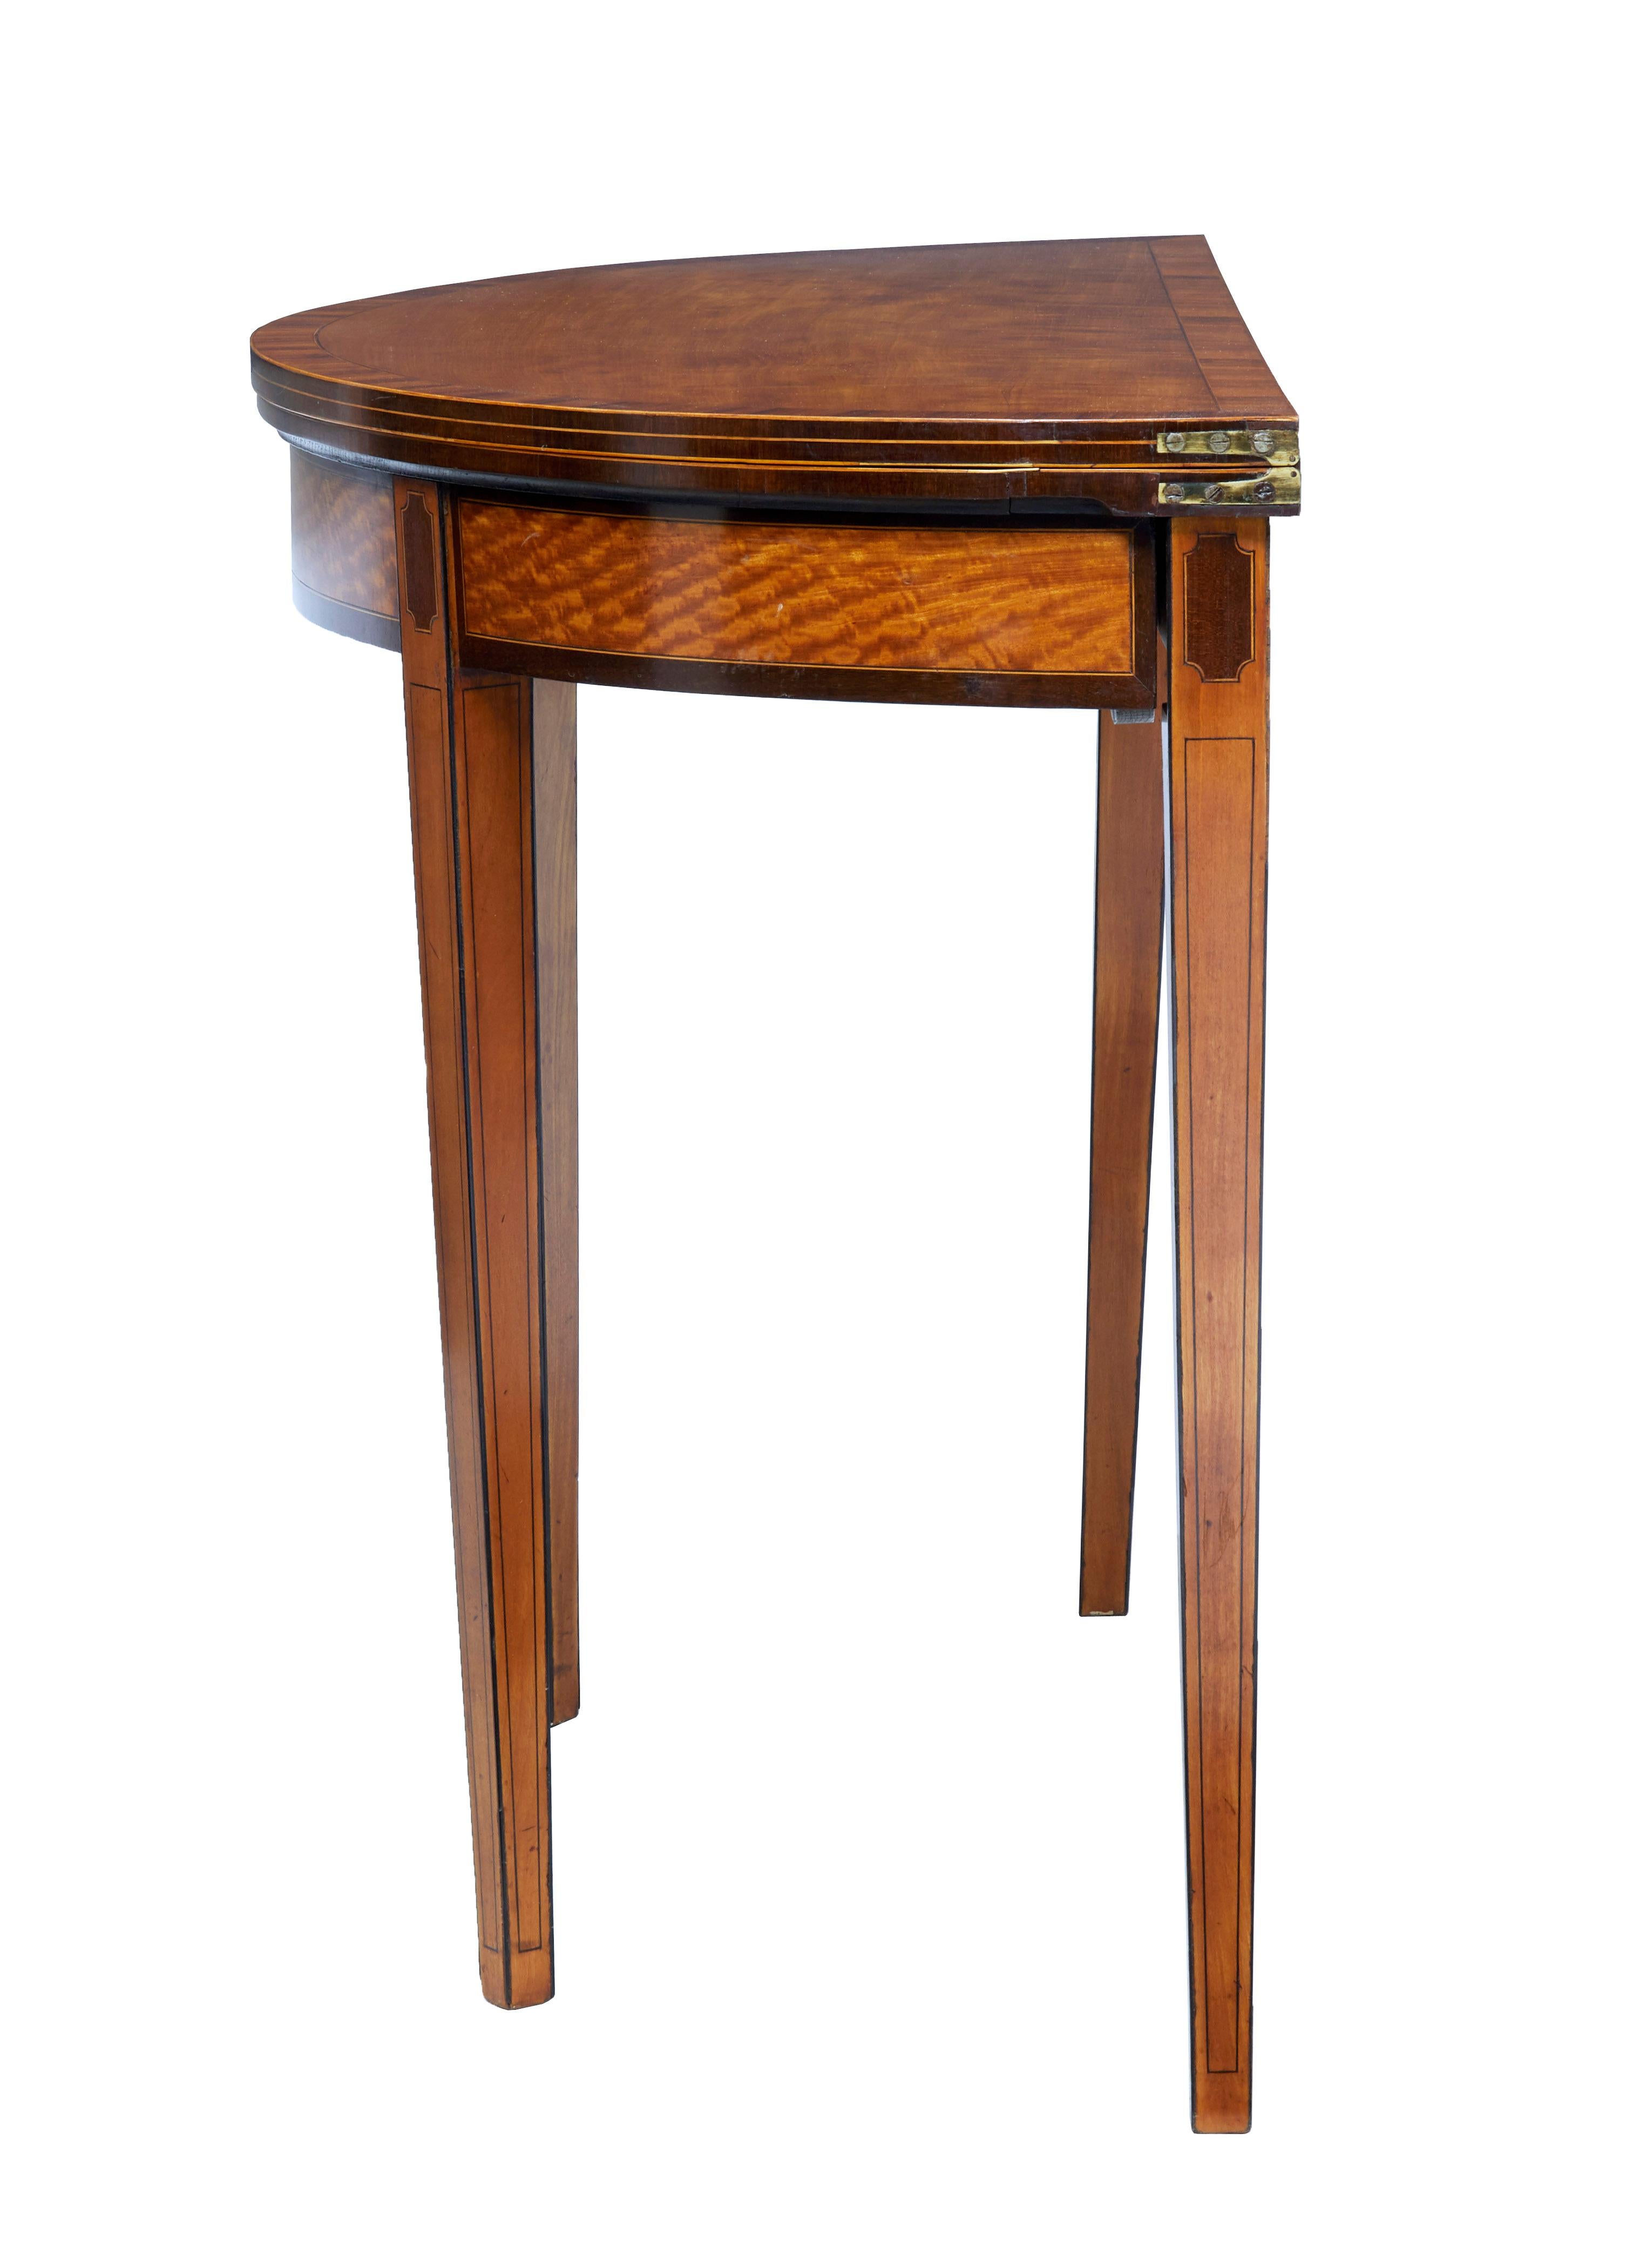 Fine quality demilune Regency card table, circa 1820 with strong Sheraton influence.

Top surface cross banded and box wood strung, opening out to a later green baize playing surface. The frieze has been fiddle back cut which allows a delightful